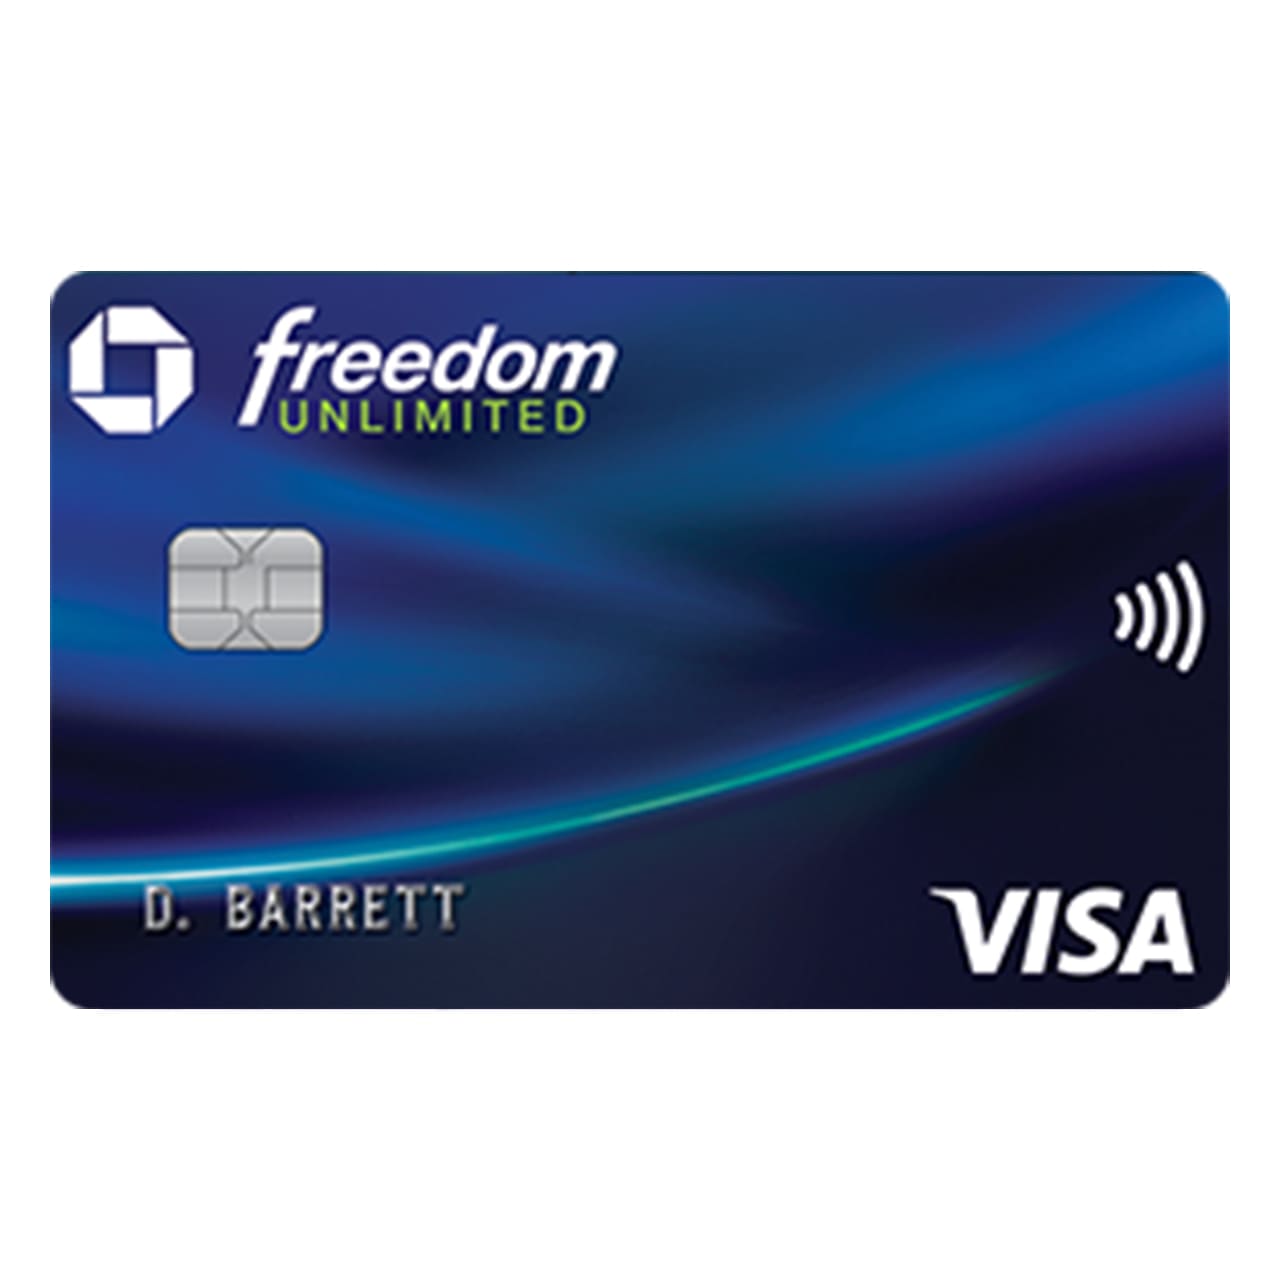 chase-freedom-unlimited-credit-card-review-buy-side-from-wsj